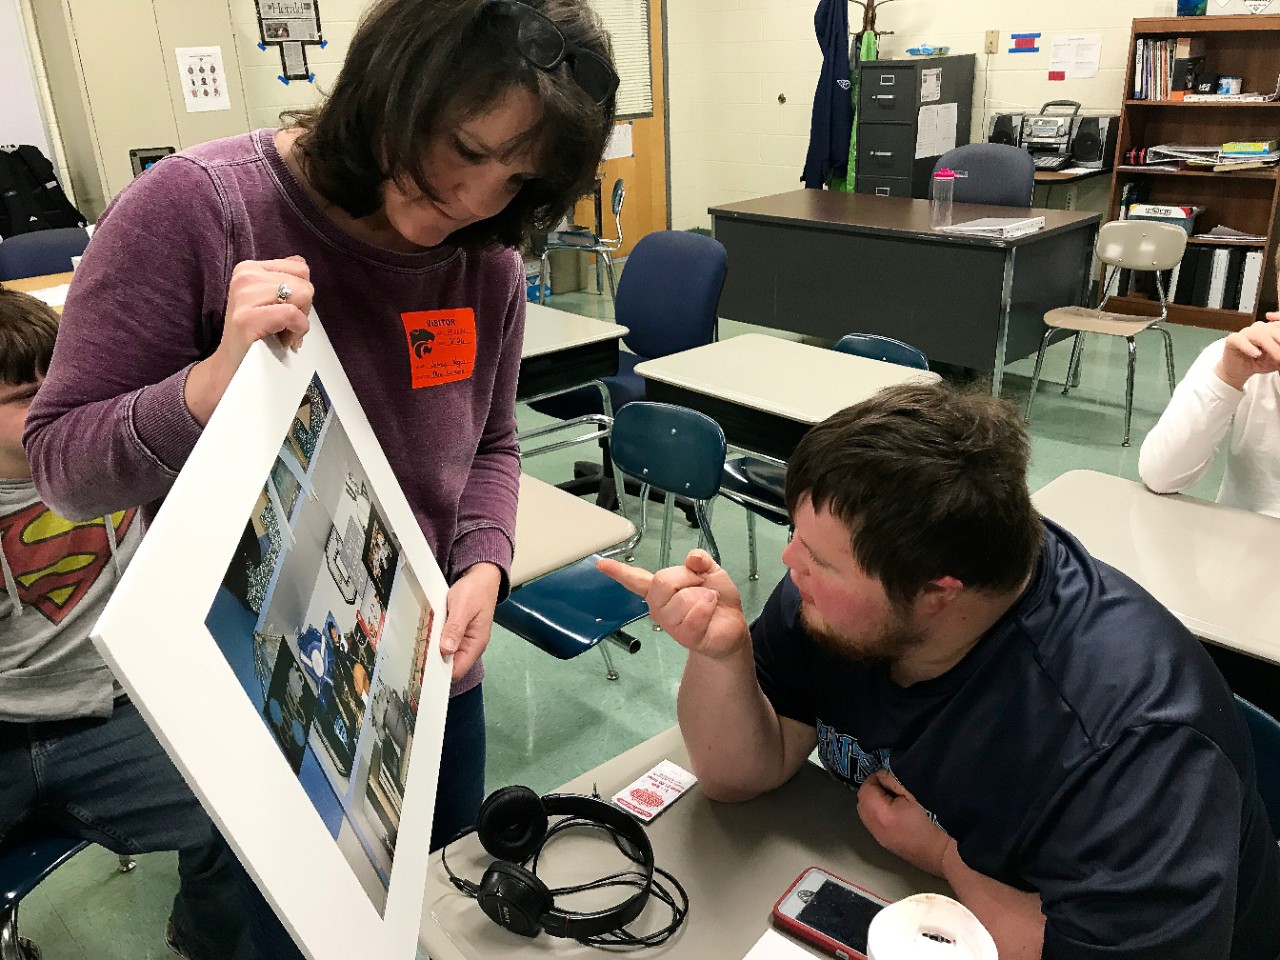 Author of the article Jen Vogus holds up a framed photo in a classroom and the young adult student seated in front of her is leaning forward and pointing at it